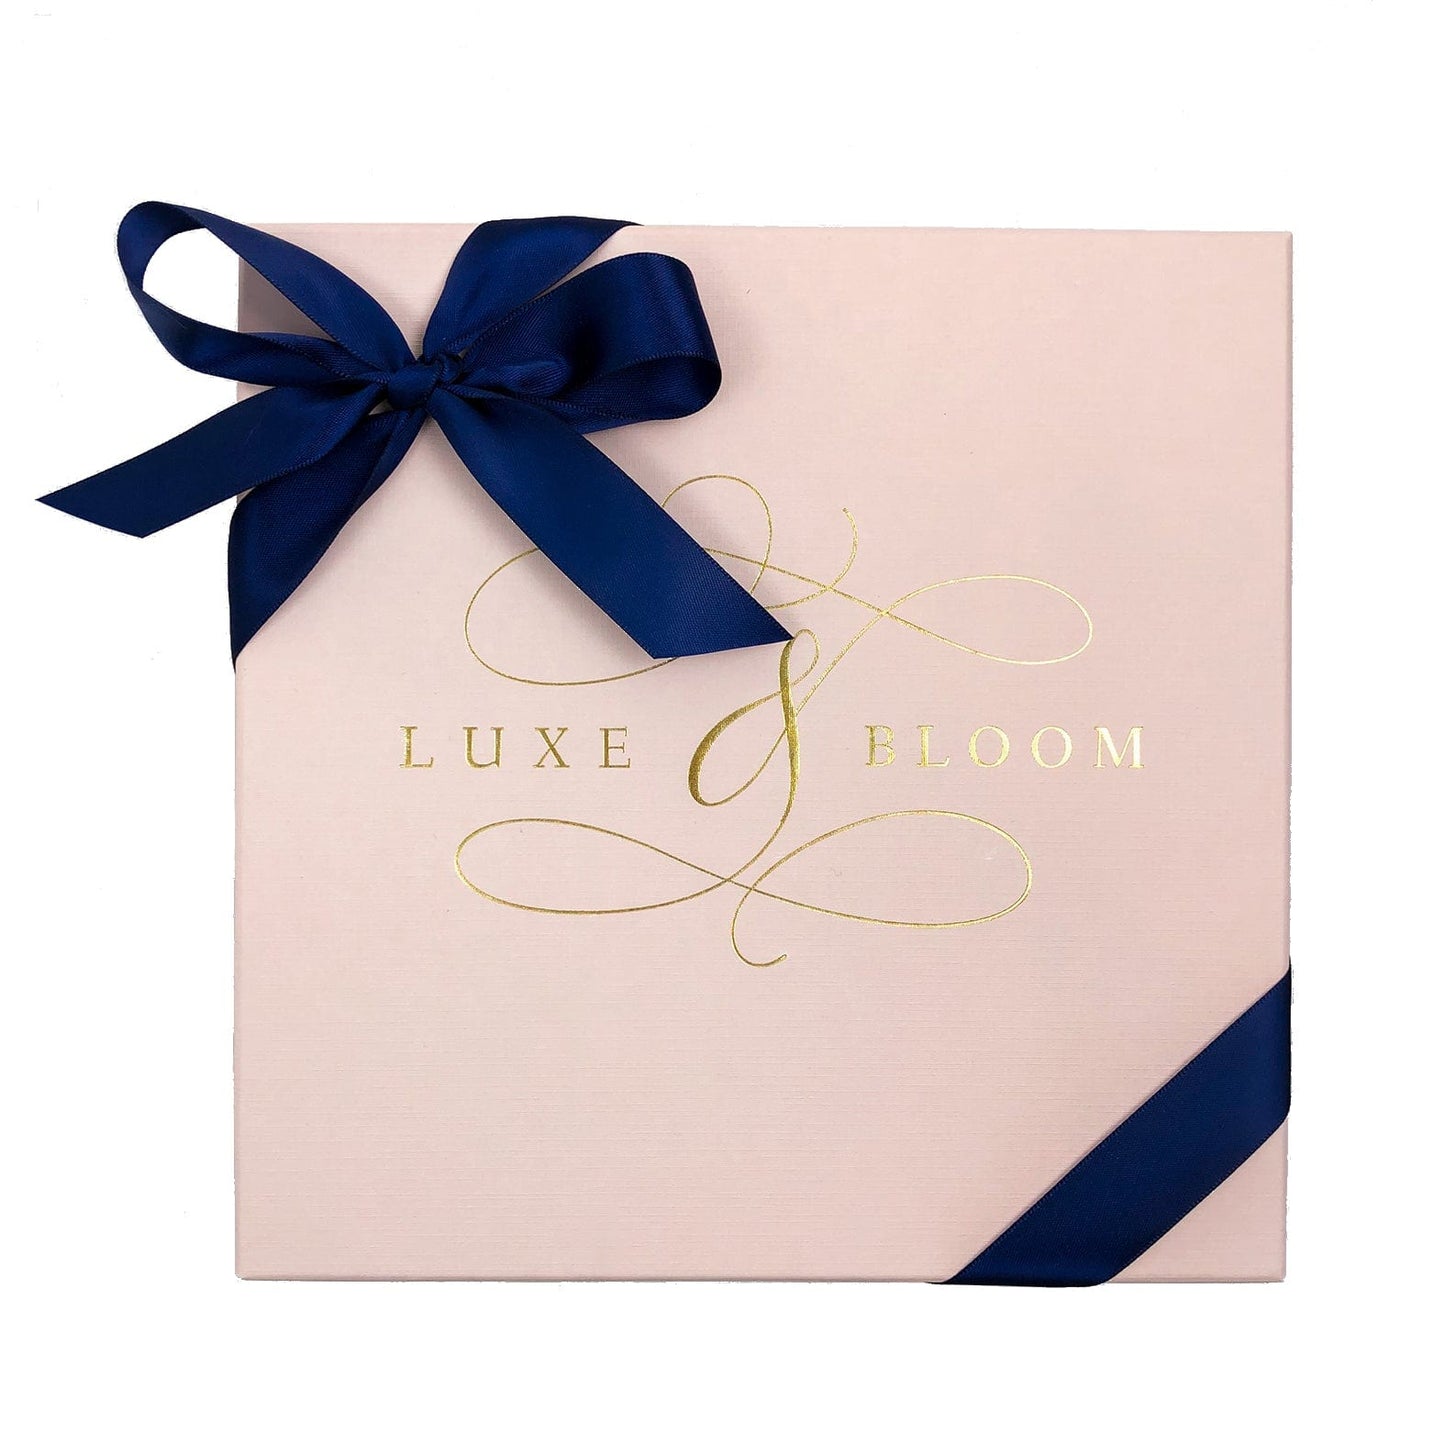 New Arrival Wedding Candy Invitation Bridesmaid Gift Boxes Set